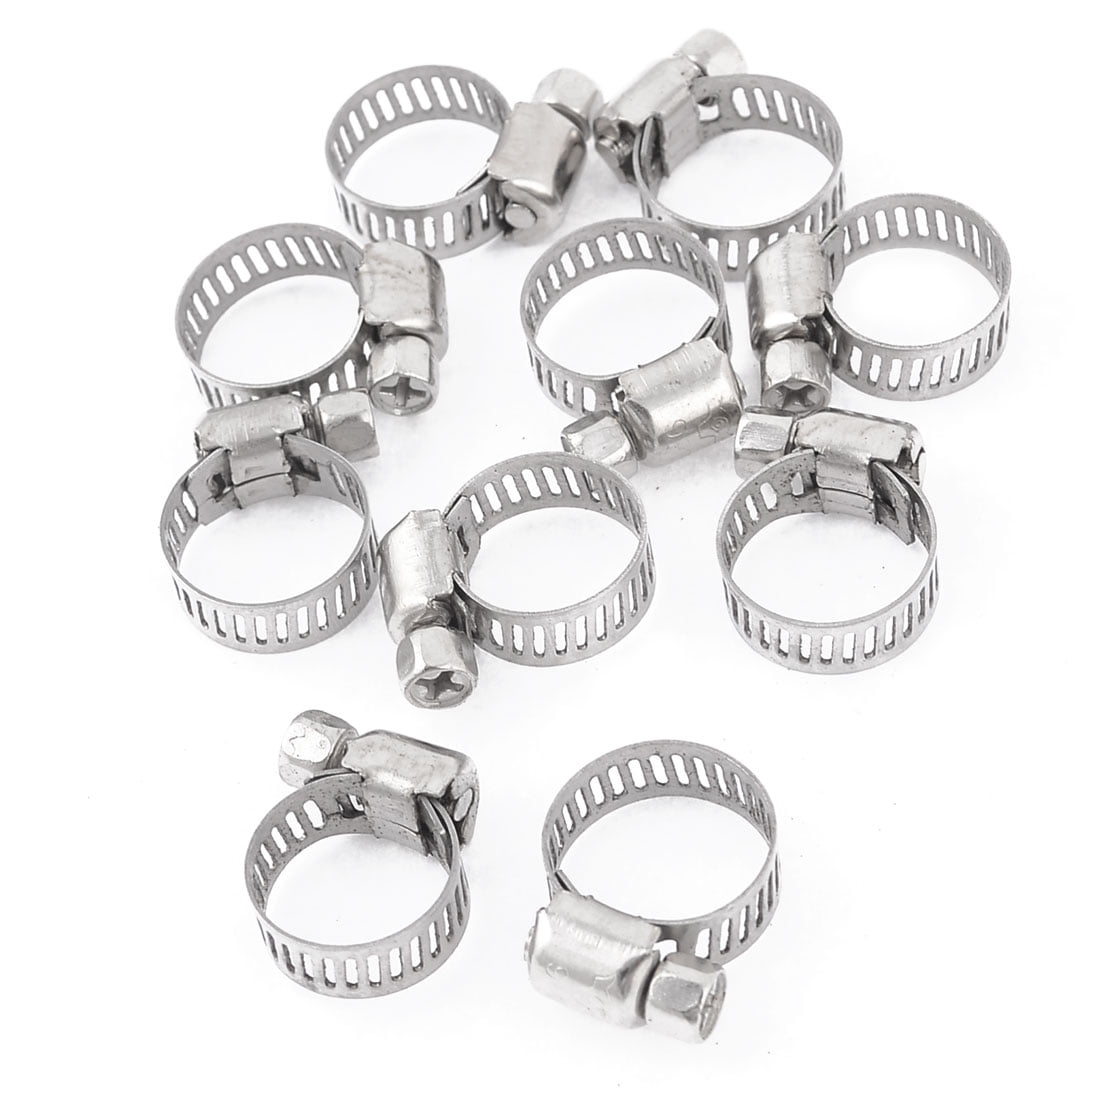 Globalflashdeal 10 Pcs 9mm-16mm Adjustable Stainless Steel Worm Drive Hose Clamp